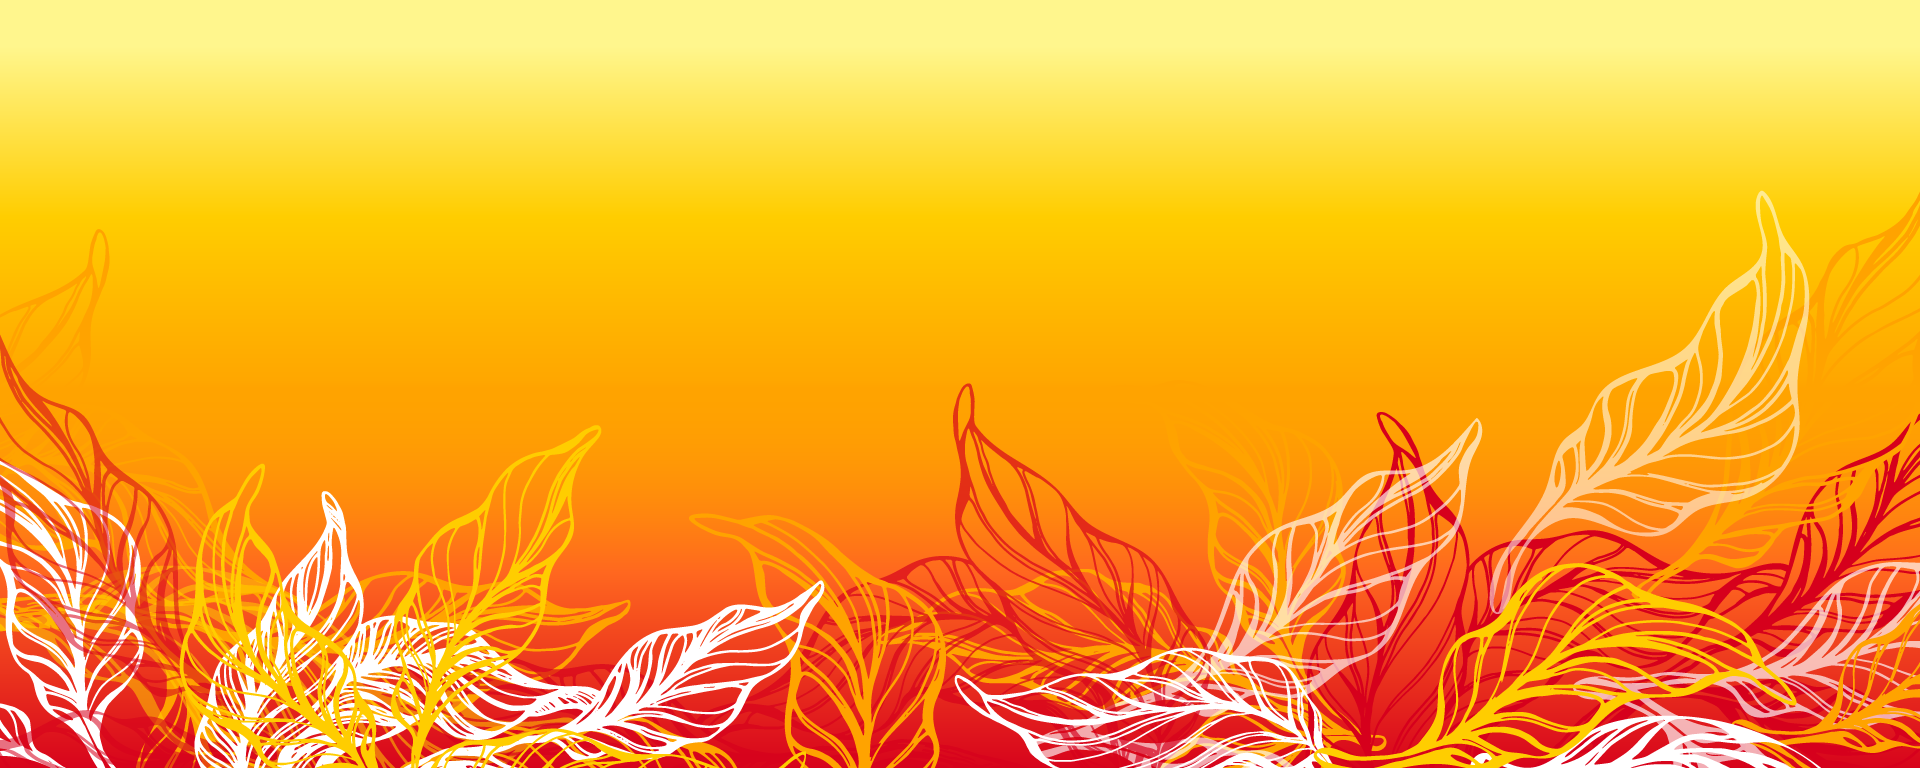 Yellow, orange, and red gradient background with white, red, and gold leaves on the bottom third